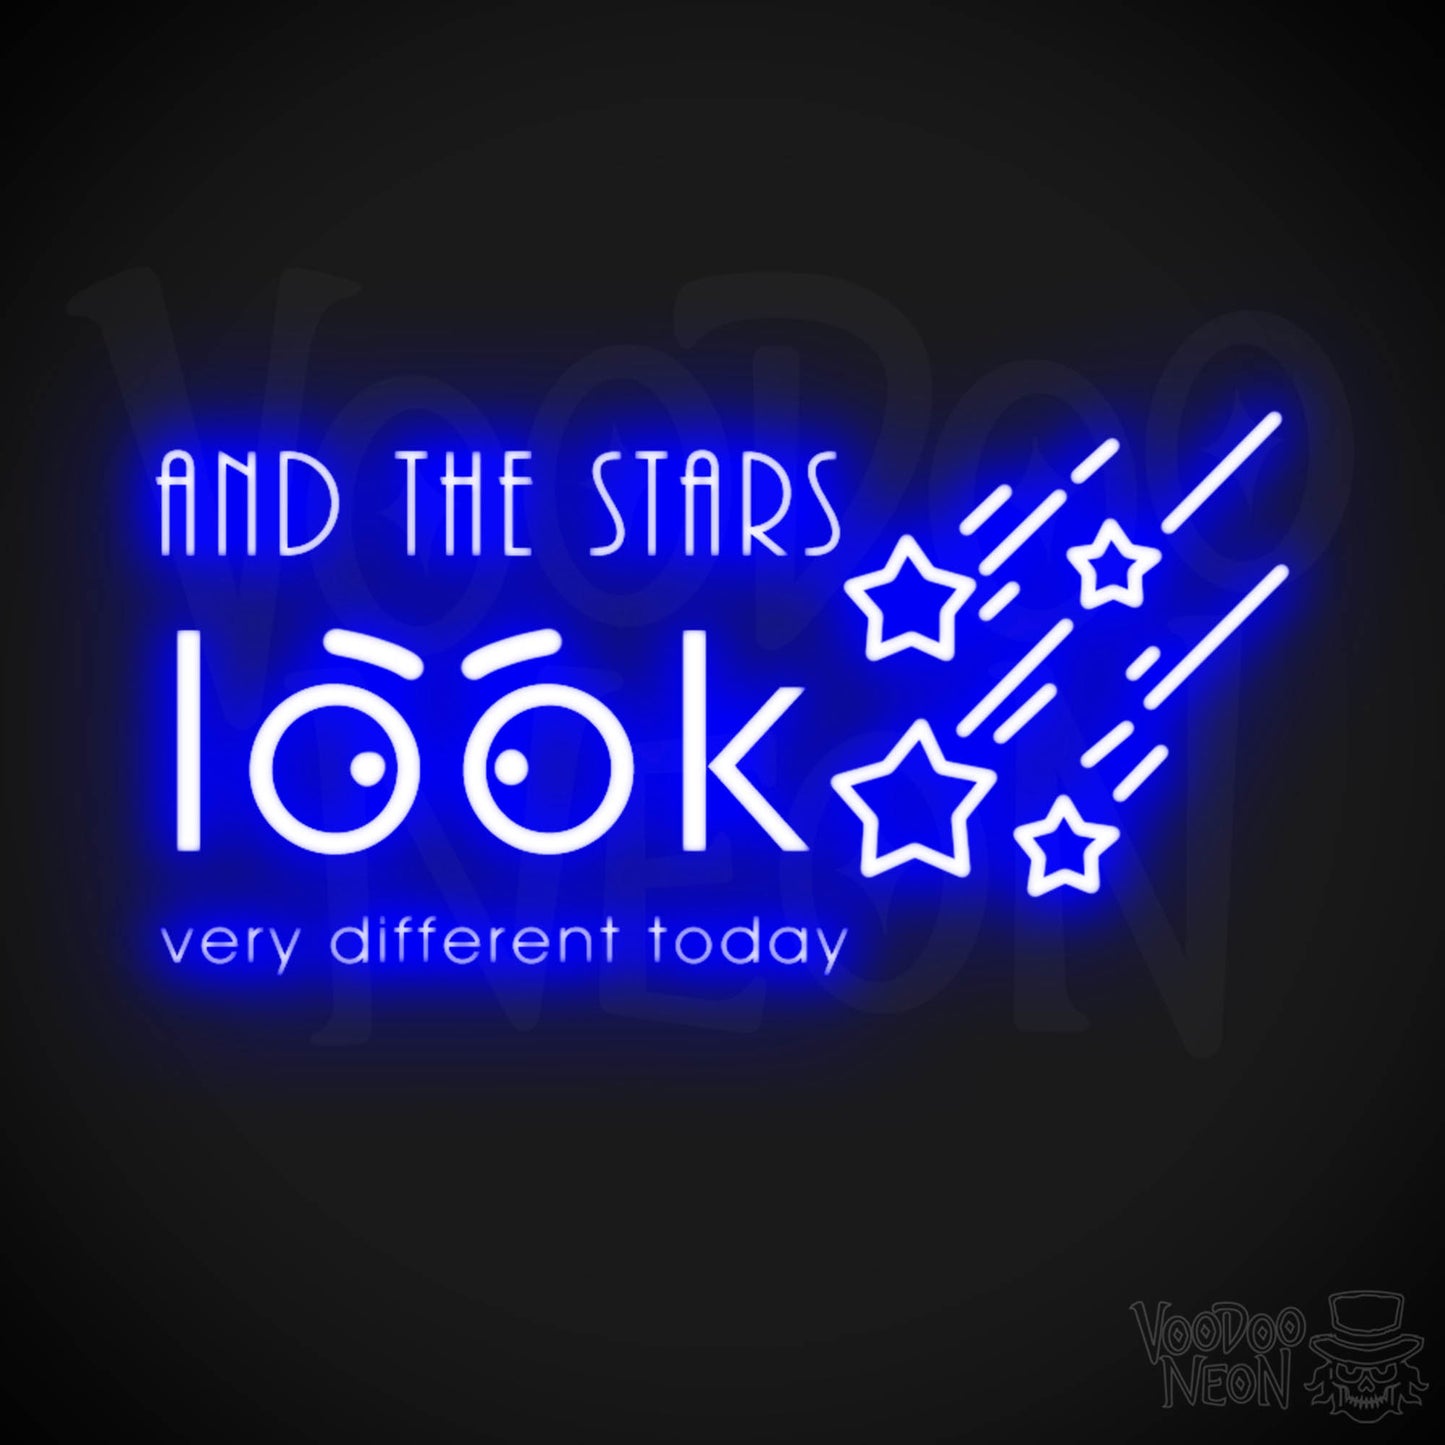 And the Stars Look Very Different Today Neon Sign - LED Wall Art - Color Dark Blue